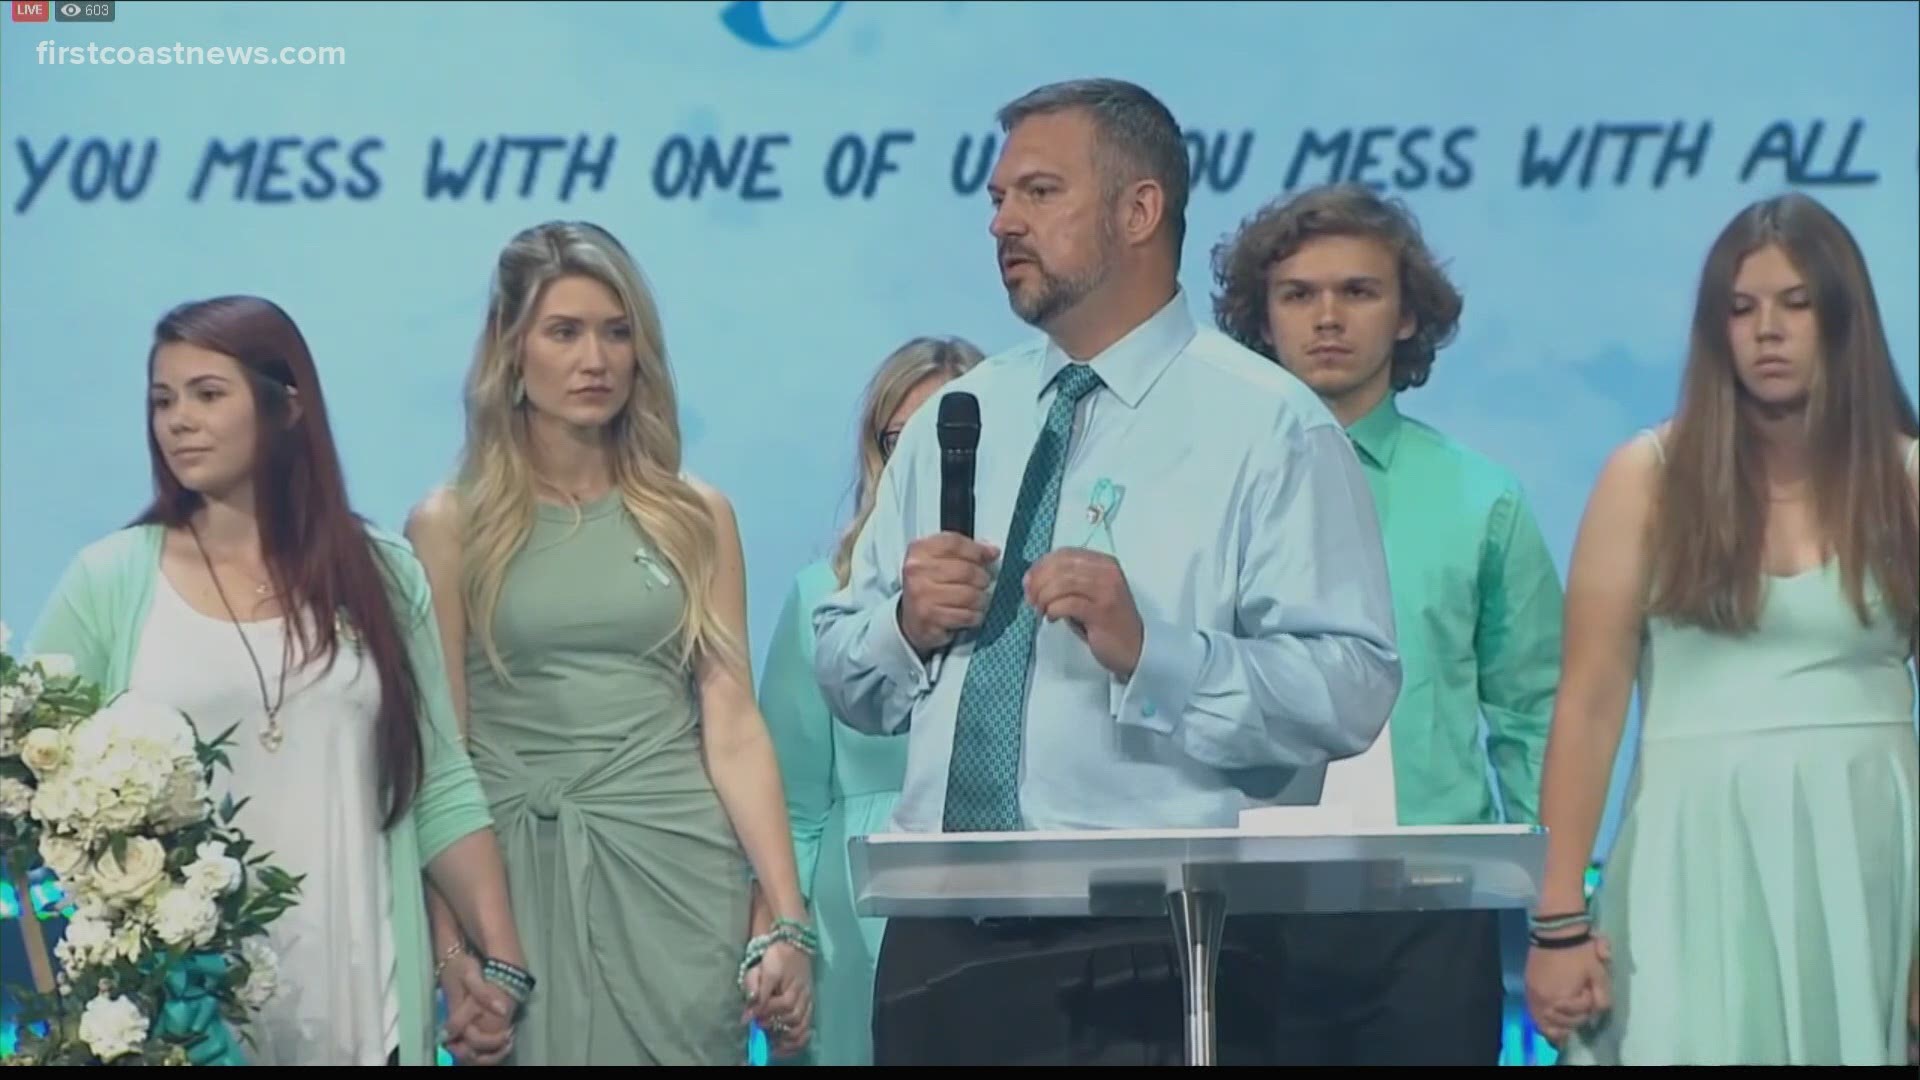 Many of the people filling the seats at Celebration Church wore bright shades of white and aqua, Tristyn's favorite colors. They also perfectly fit her personality.